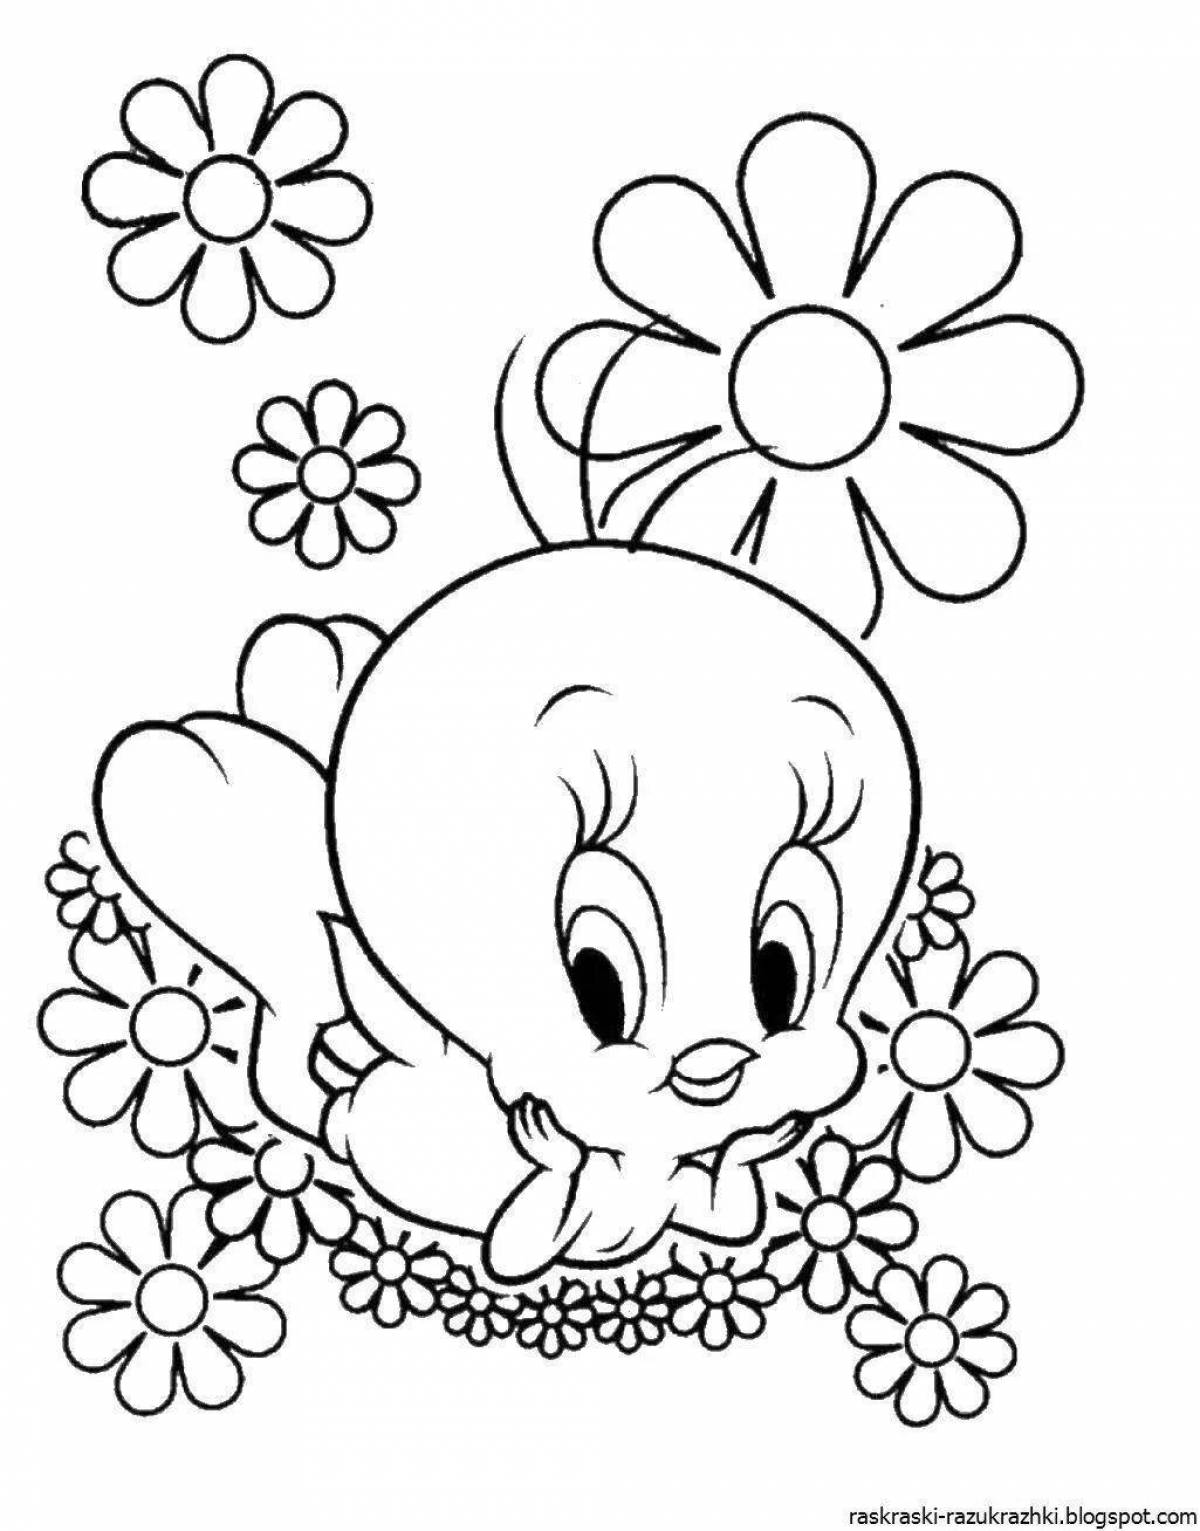 Refreshing flower coloring book for 5-6 year olds